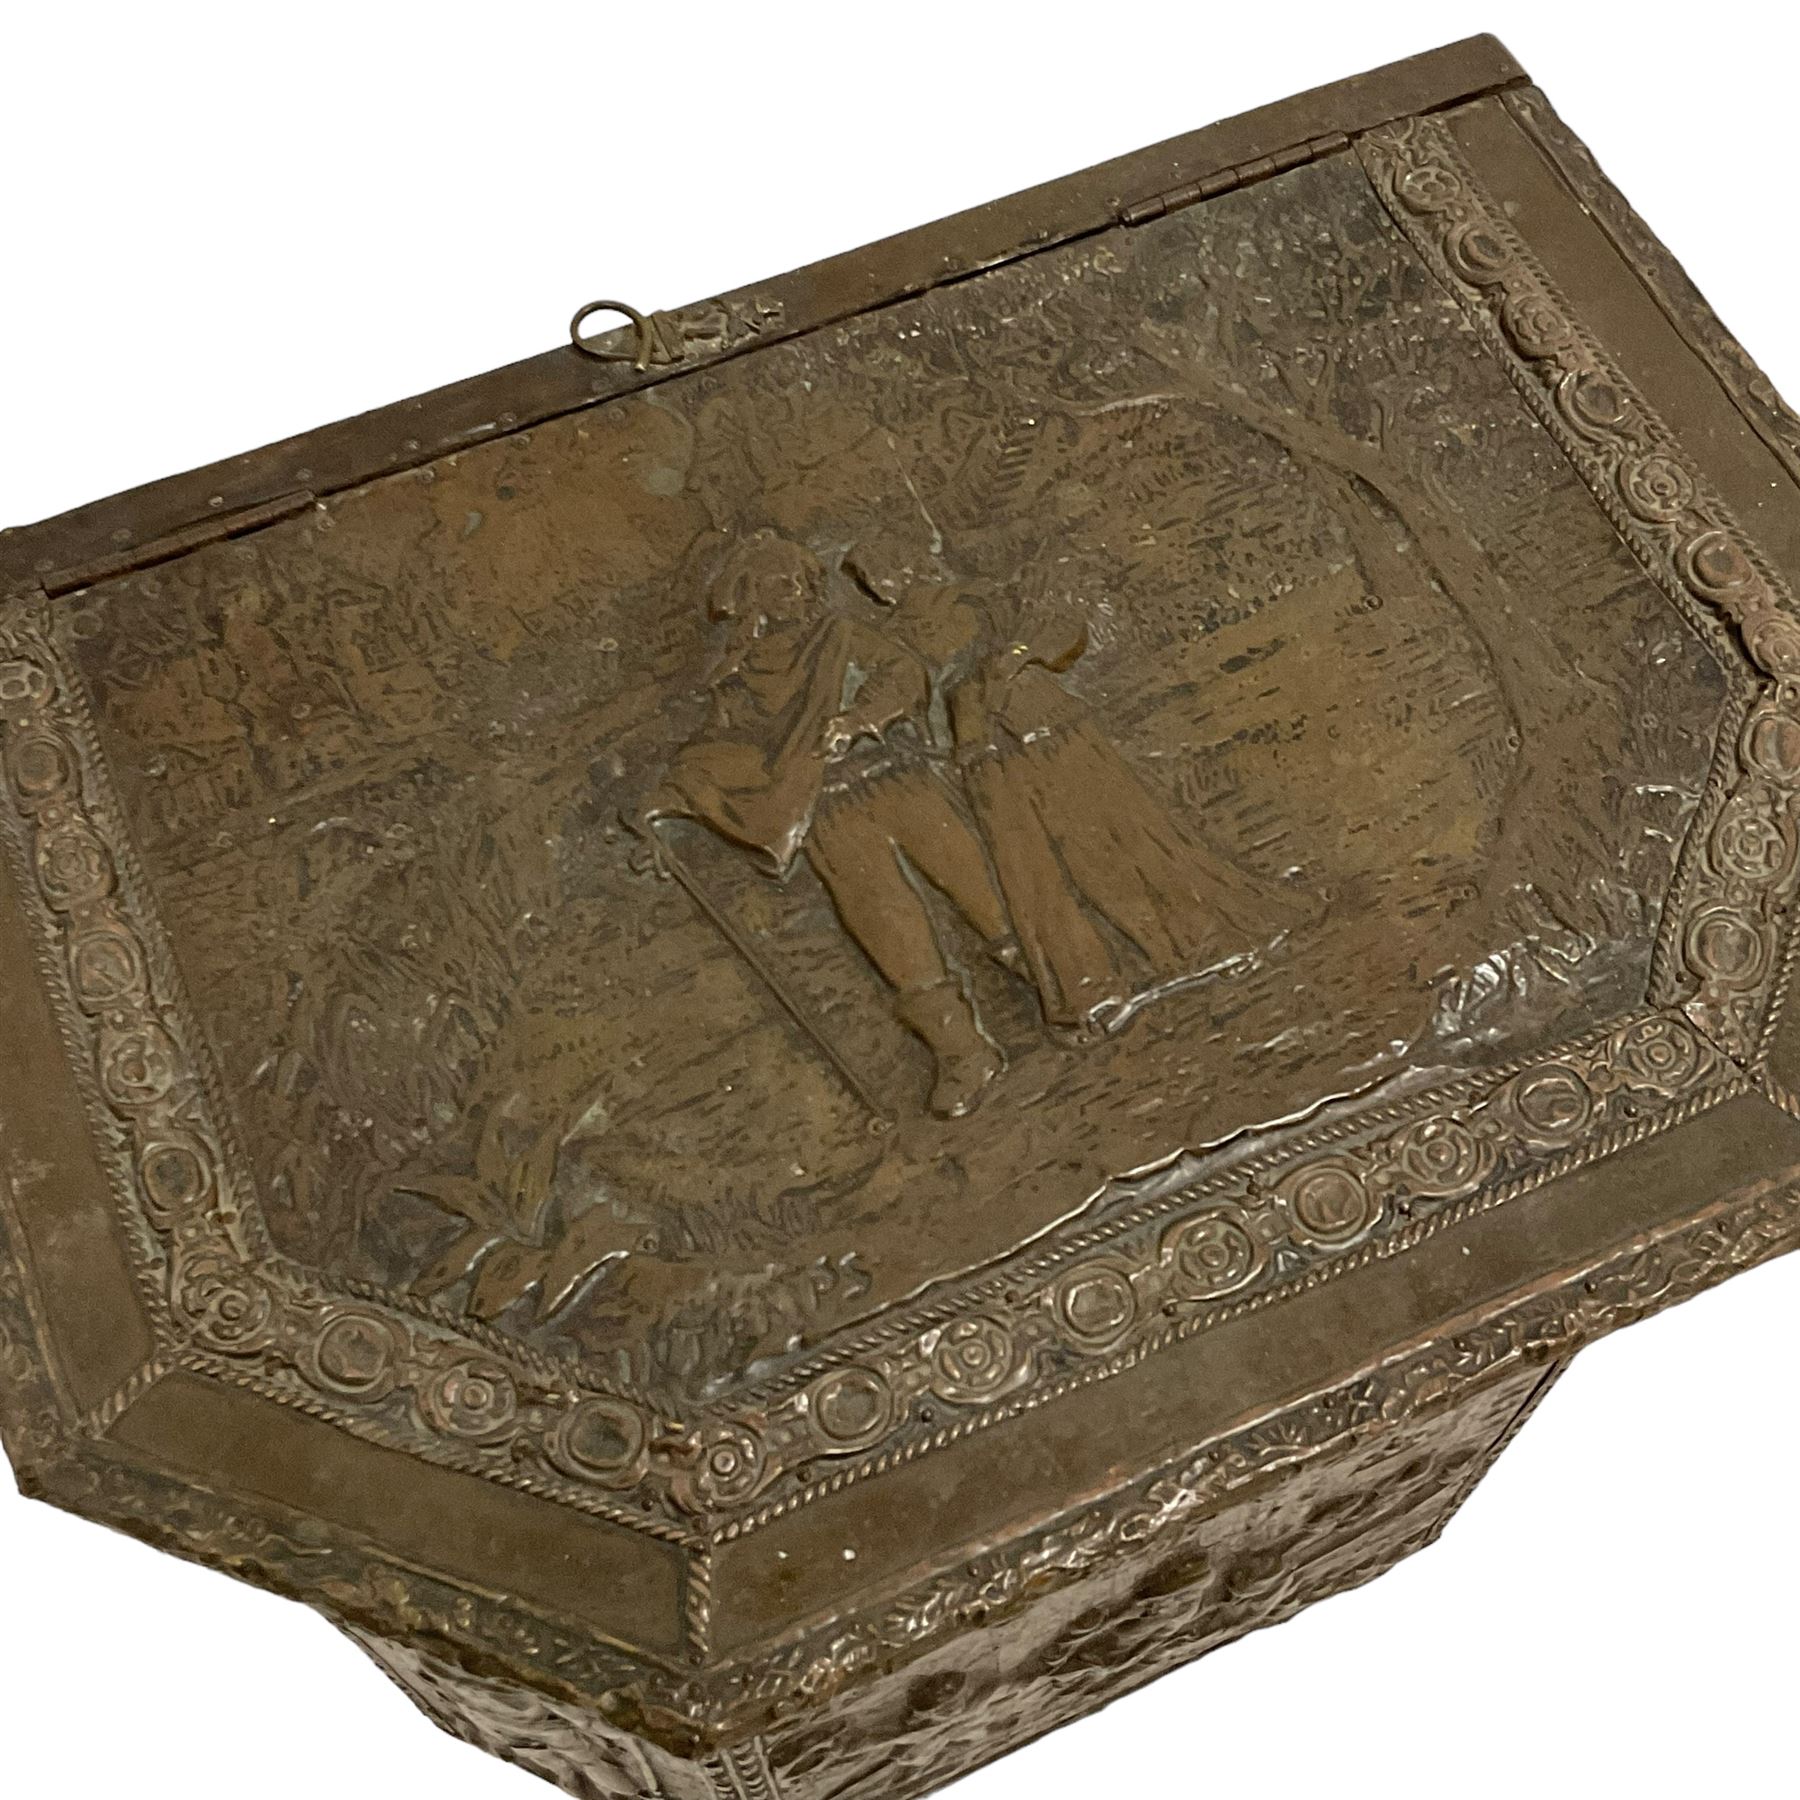 Large 19th century wooden and brass repousse coal box - Image 6 of 7